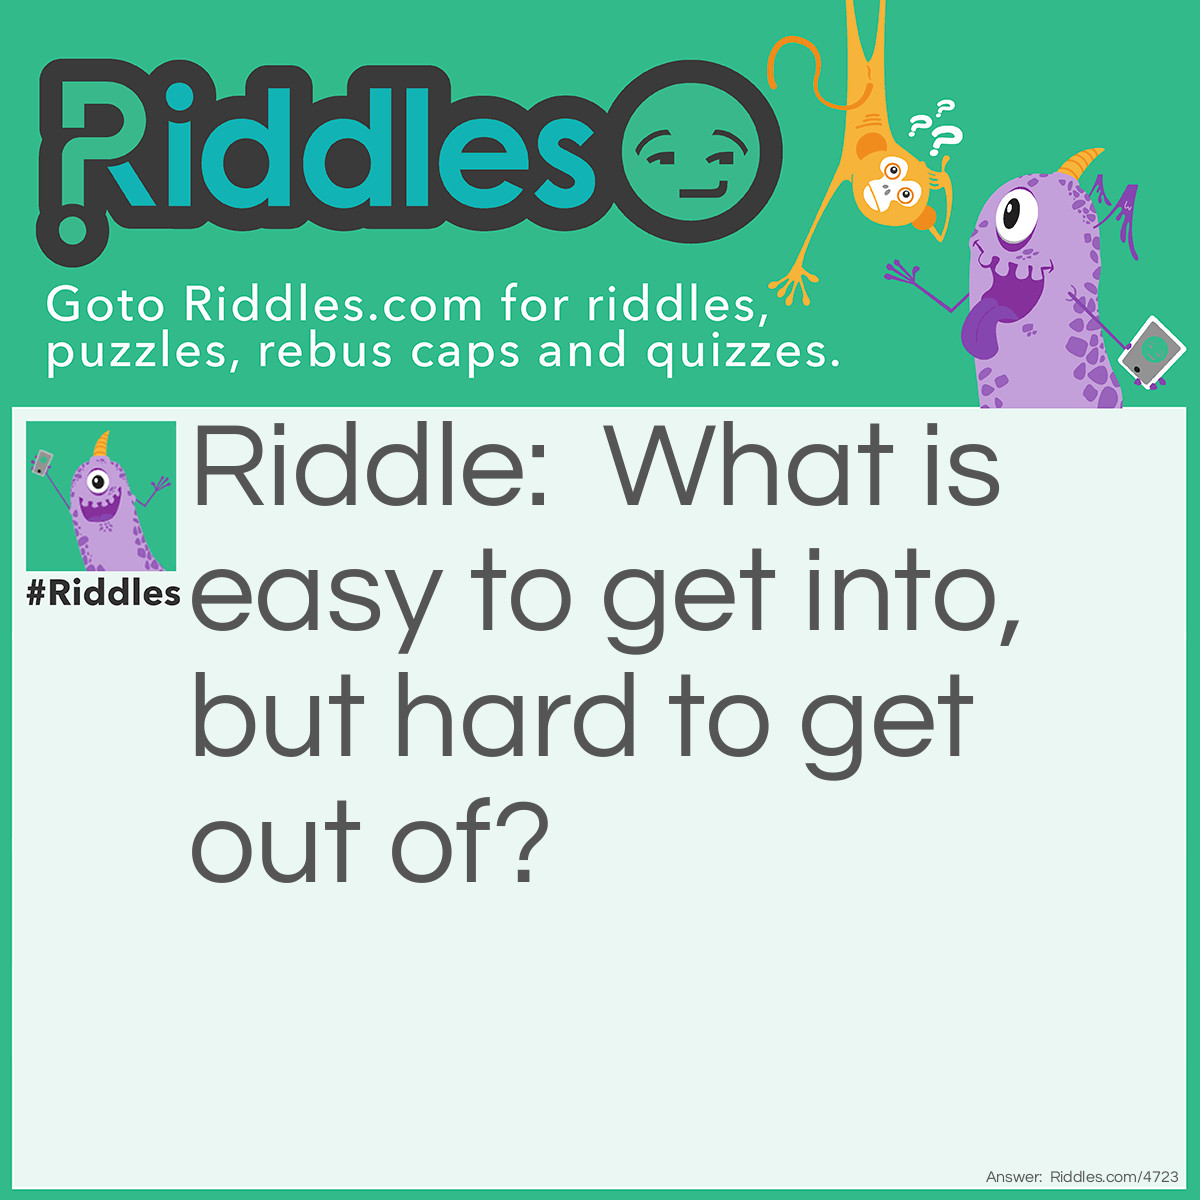 Riddle: What is easy to get into, but hard to get out of? Answer: Trouble.